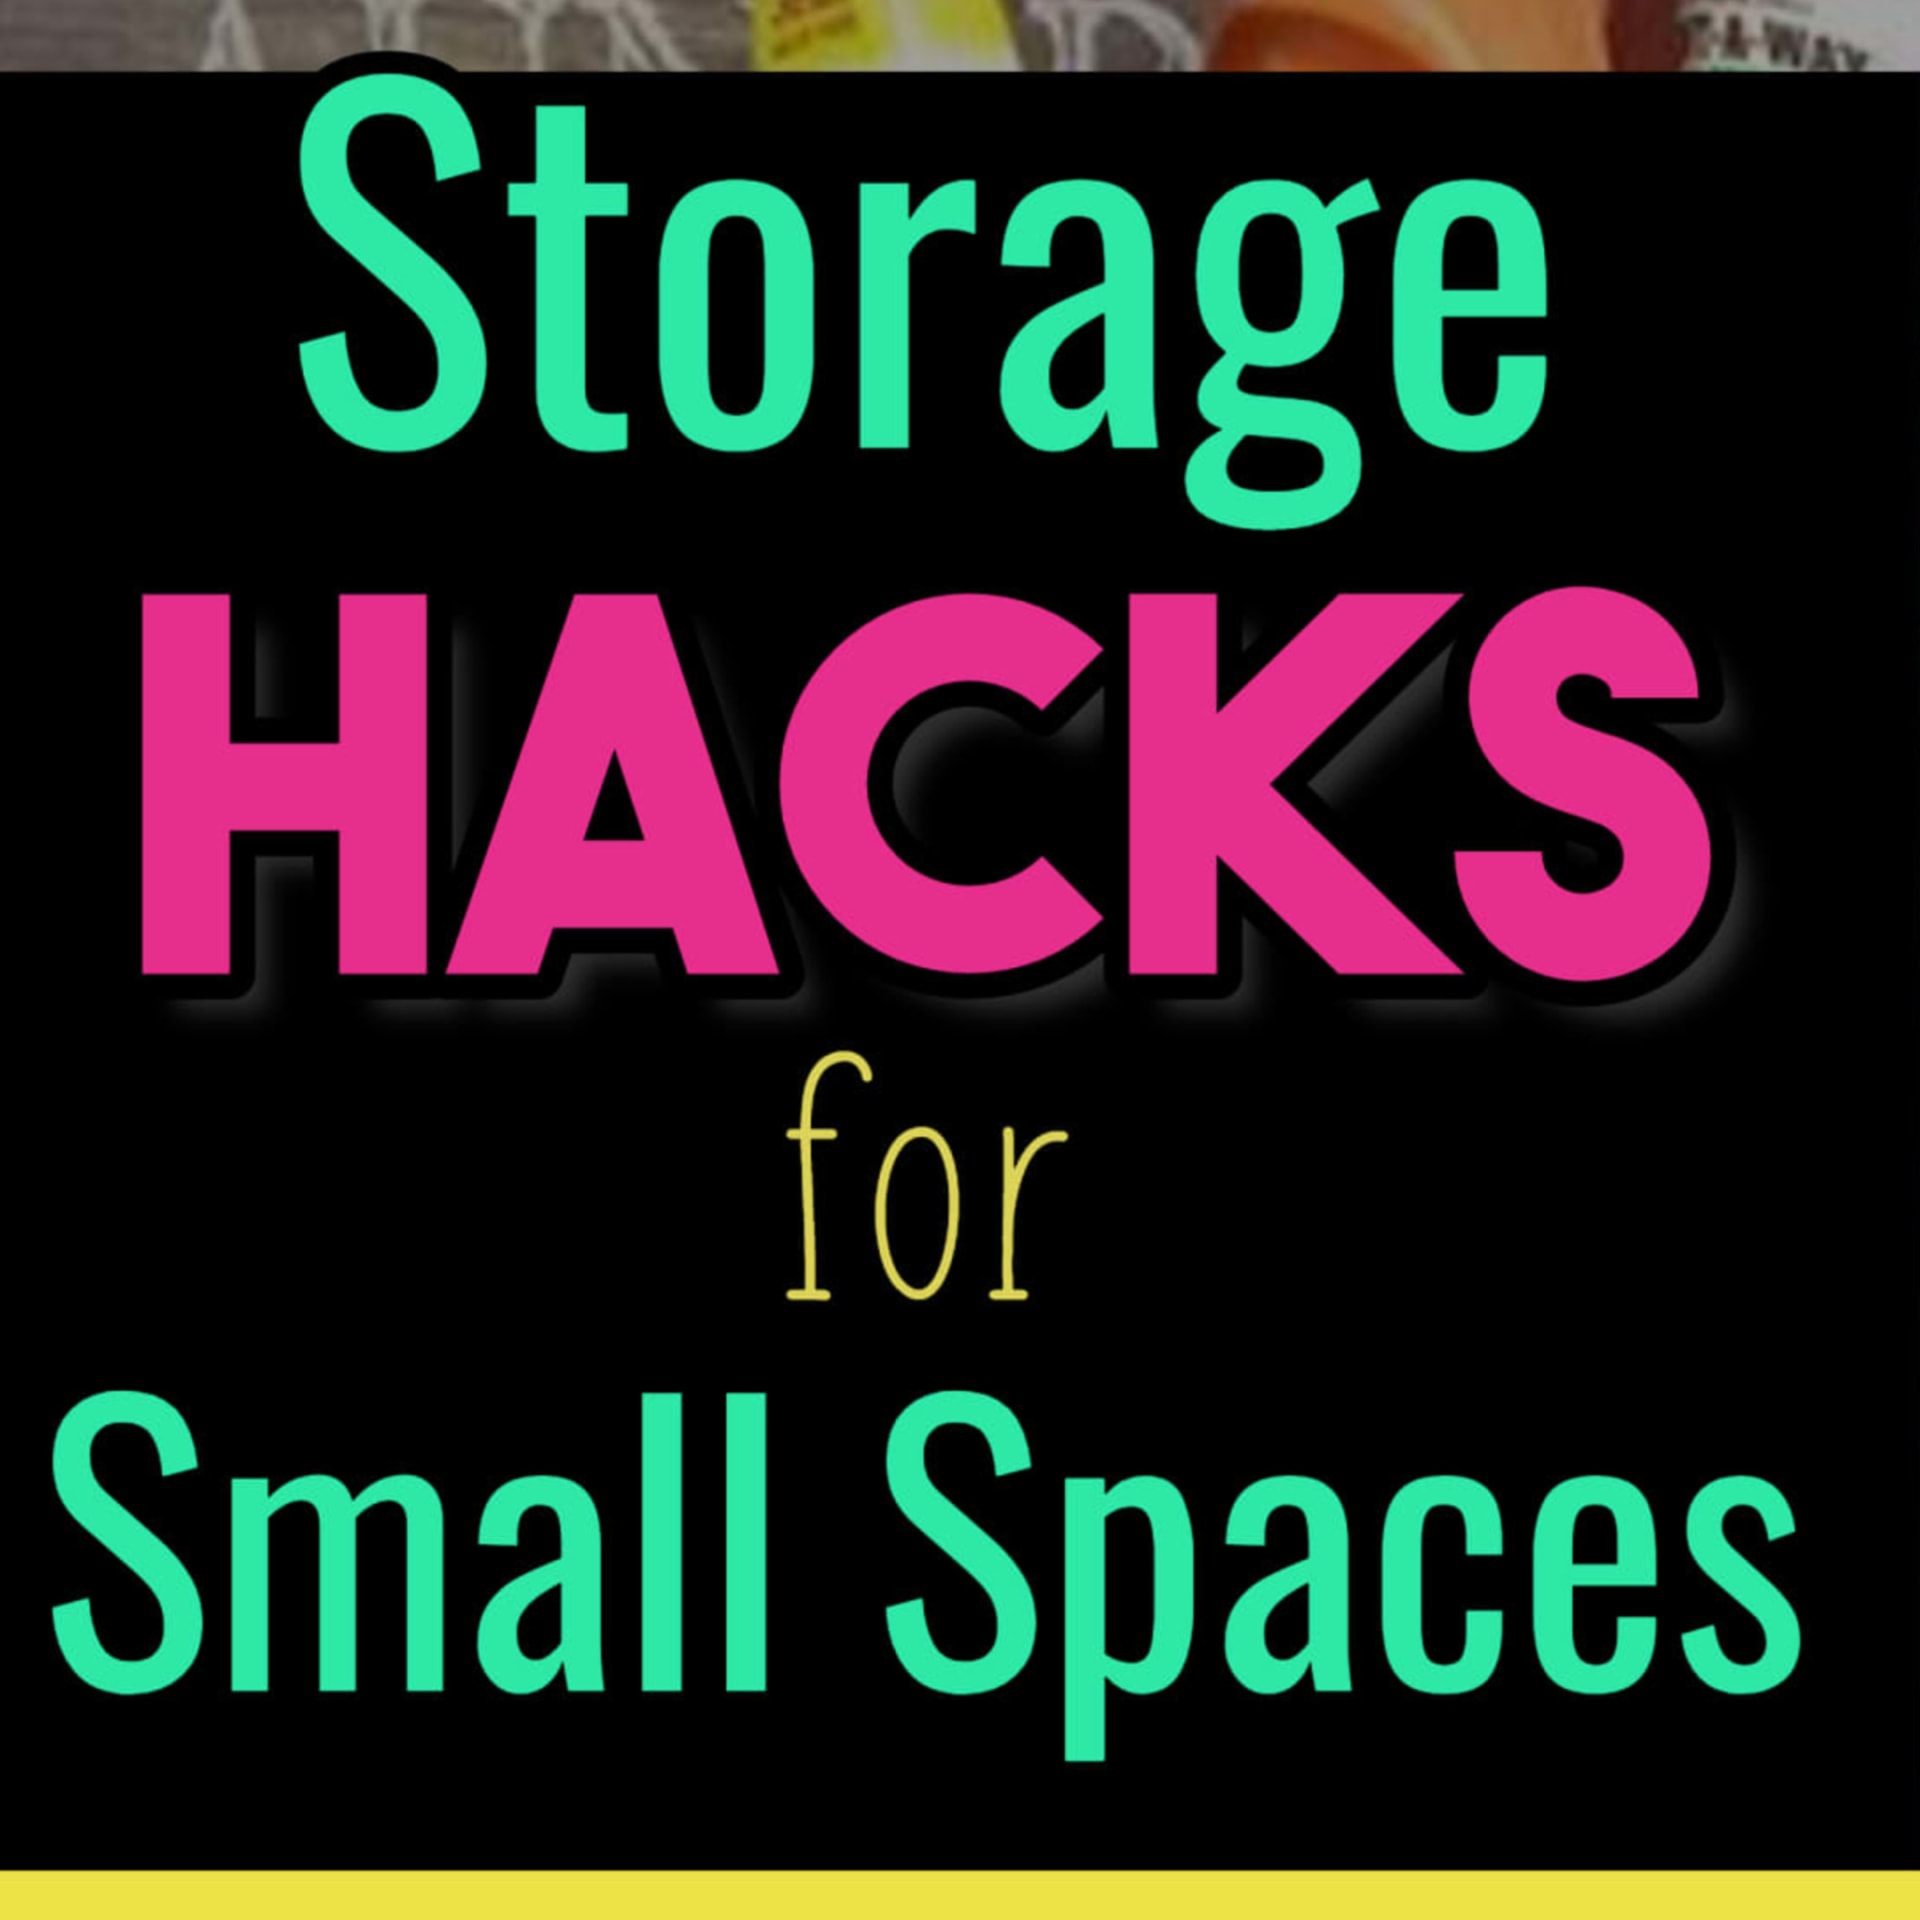 Simple storage and clutter solutions for small spaces.  Creative home organization hacks for organizing small spaces on a budget